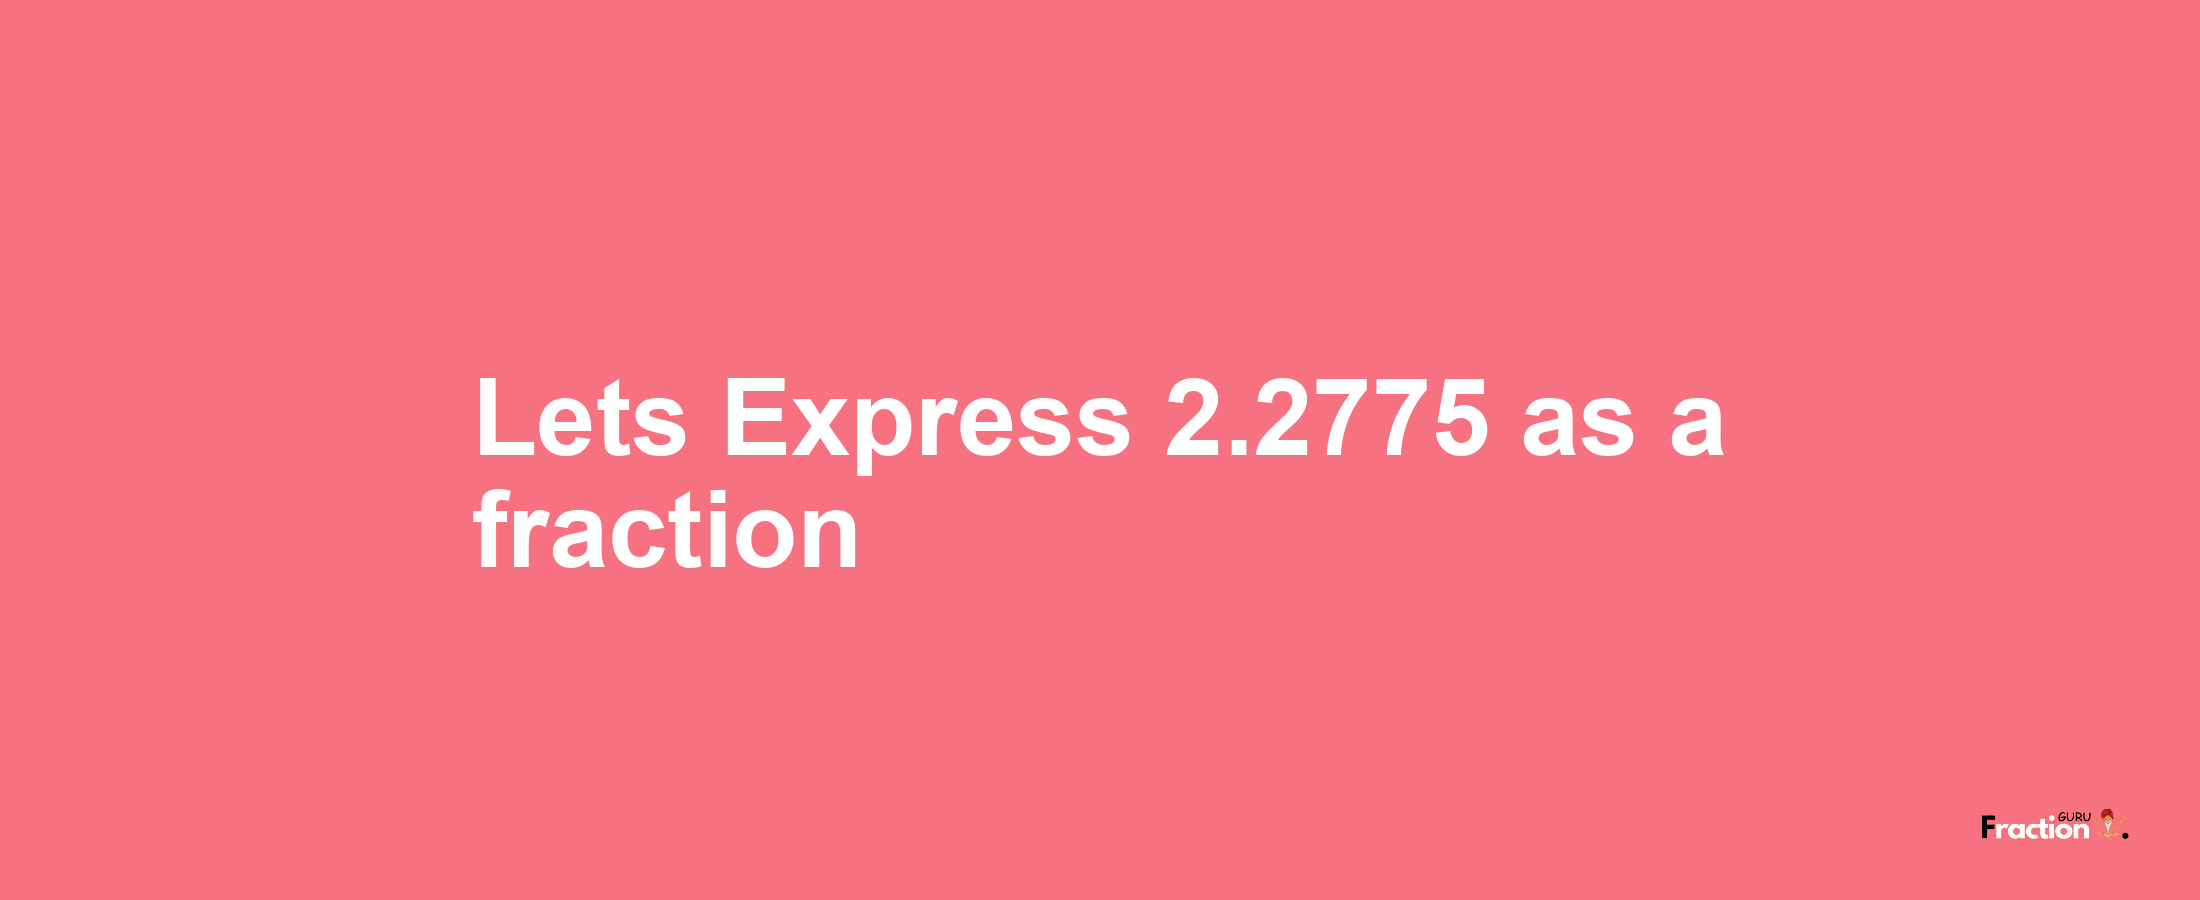 Lets Express 2.2775 as afraction